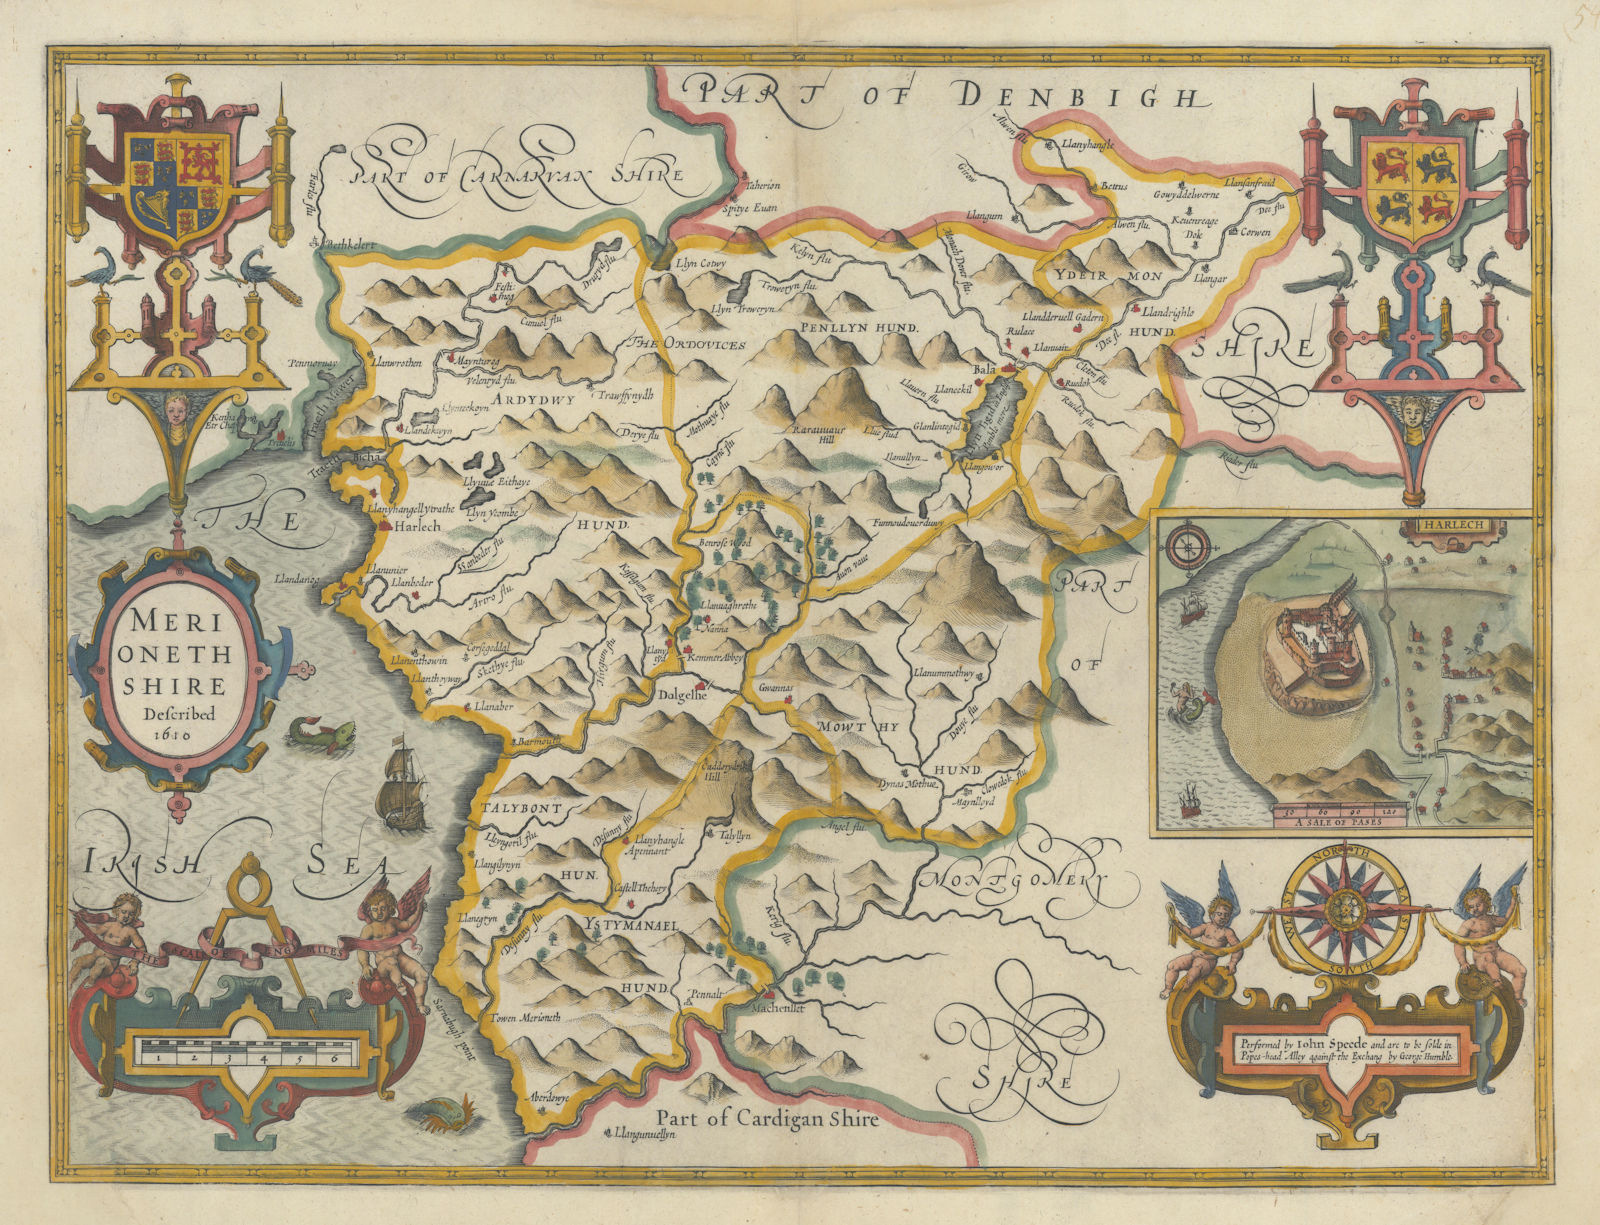 Merioneth Shire Described county map by John Speed. George Humble edition 1627